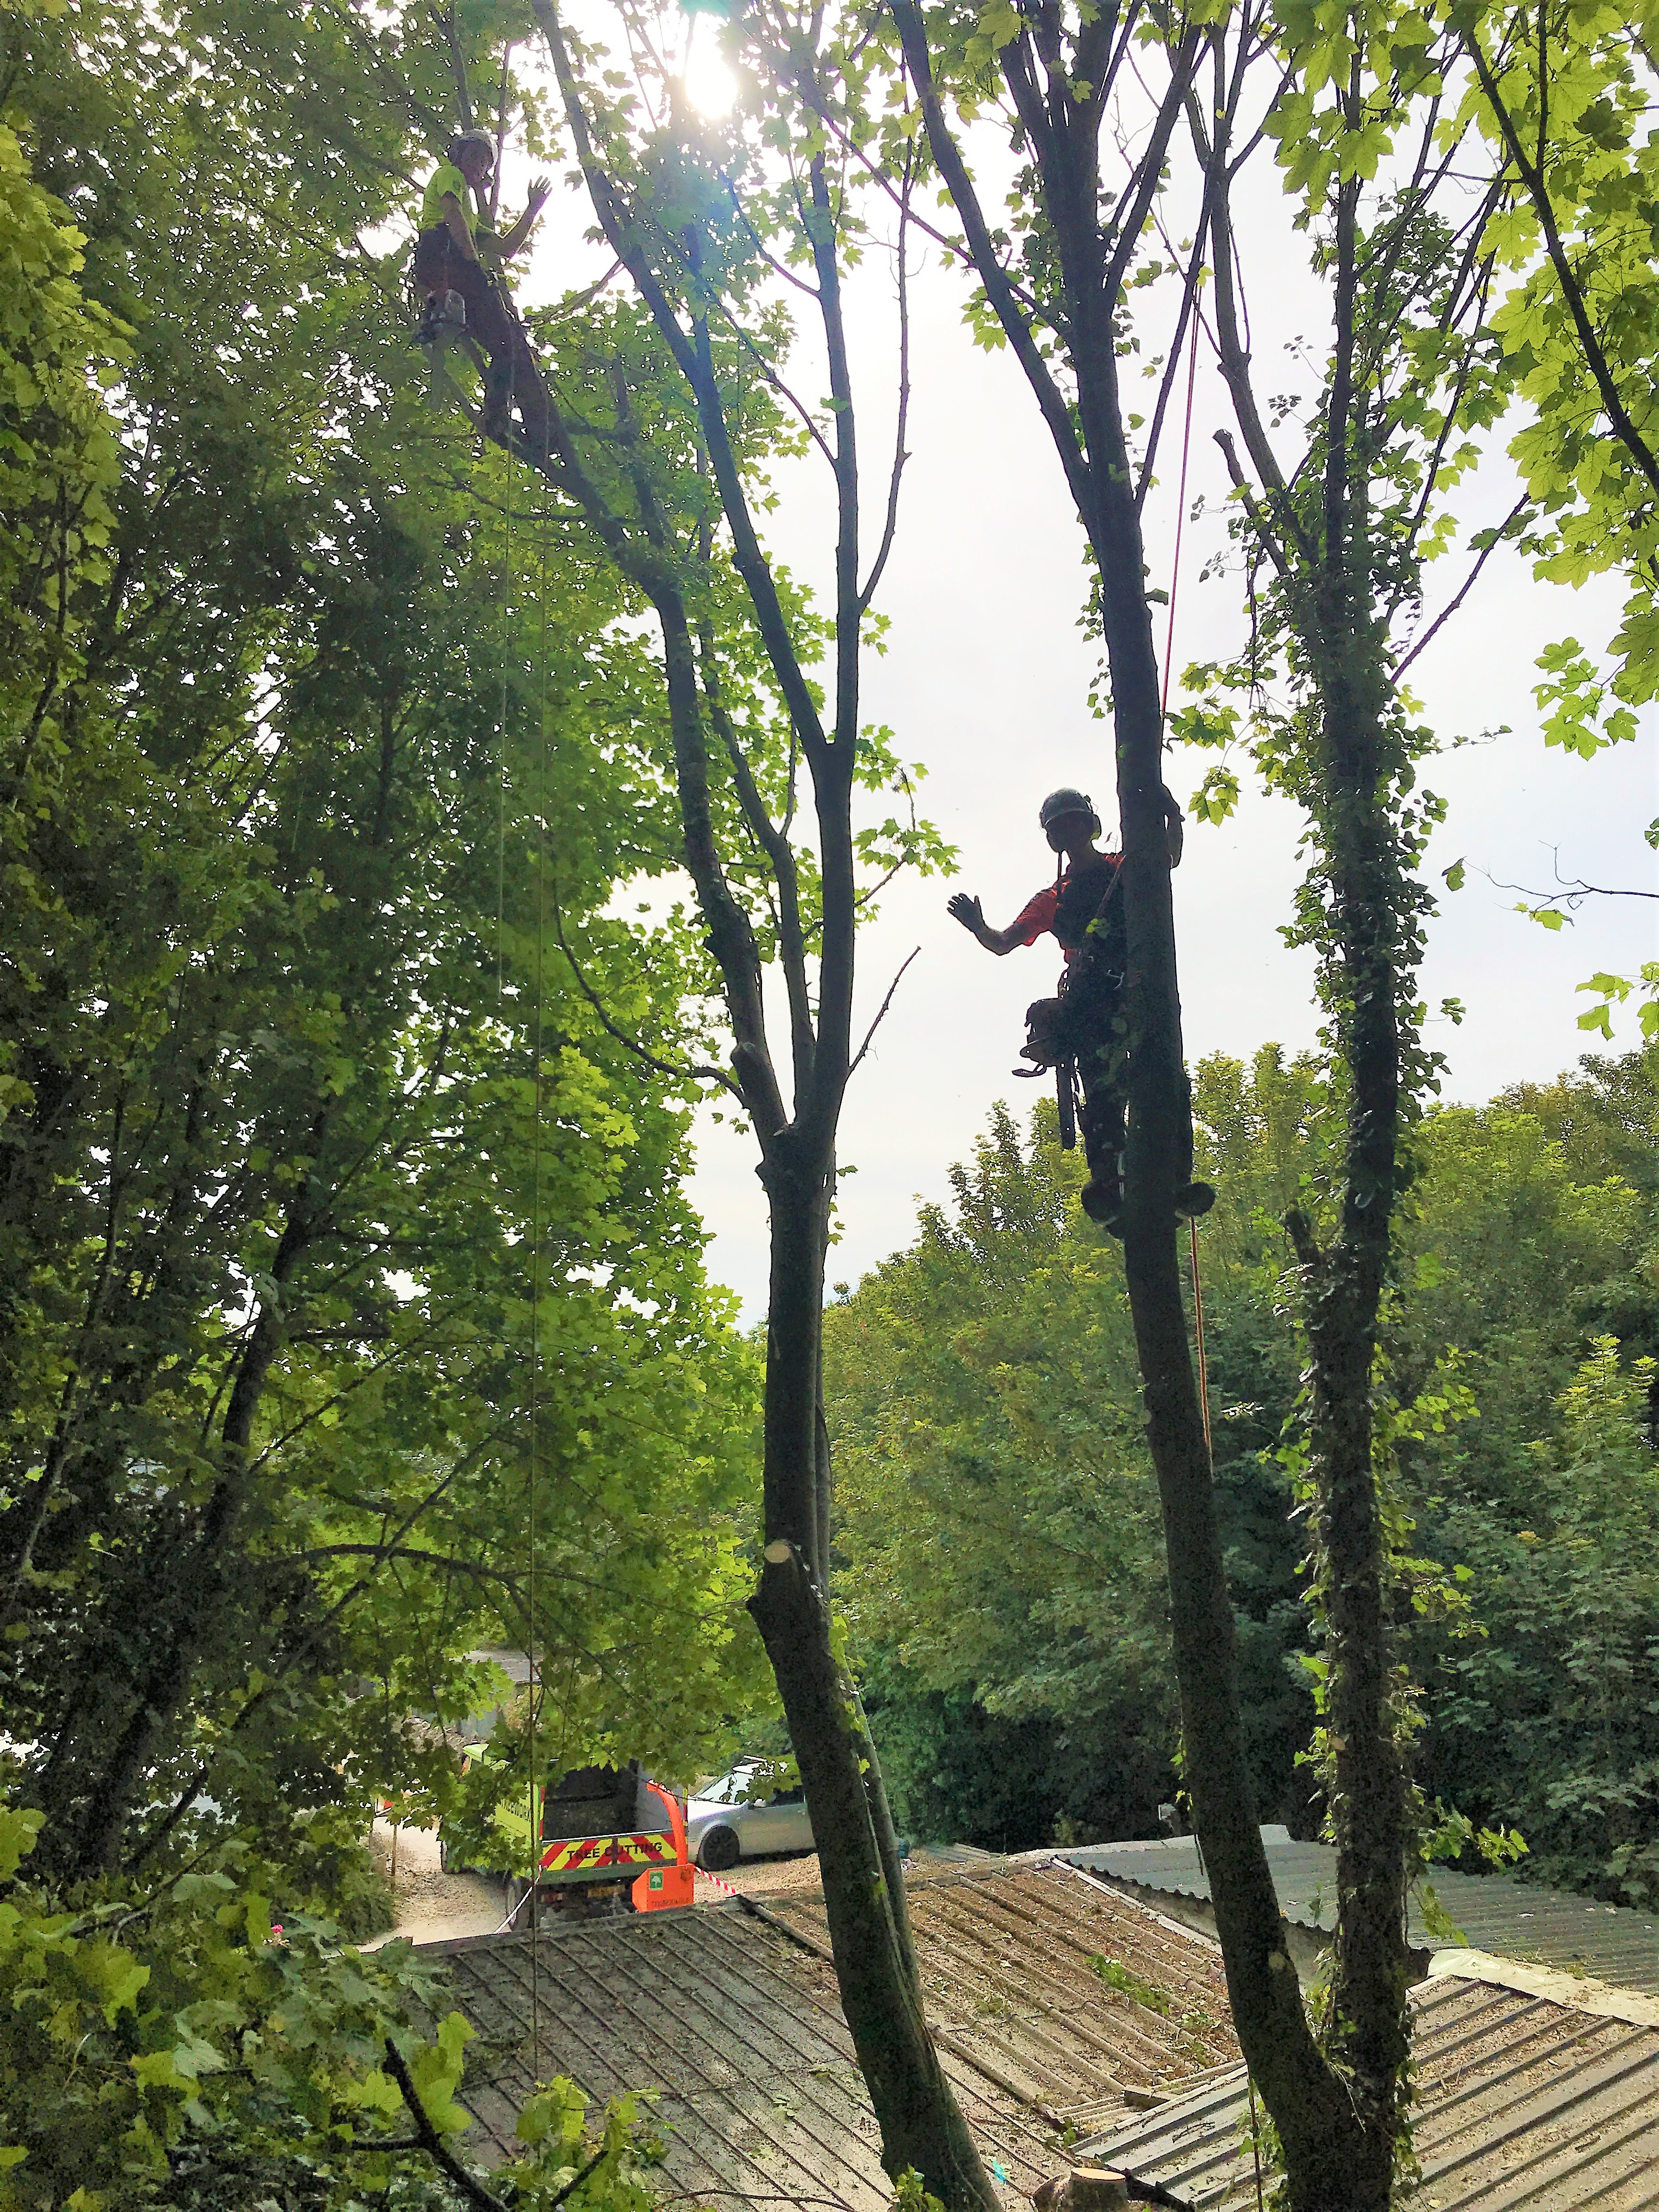 Dorset Treeworx Ltd | Weymouth tree surgeon team covering Dorchester, Portland, Weymouth, Dorset - tree application service booking a date and how much does a tree surgeon cost in Weymouth, Portland, Dorchester, South Dorset - Tree climbs in a tree waving.